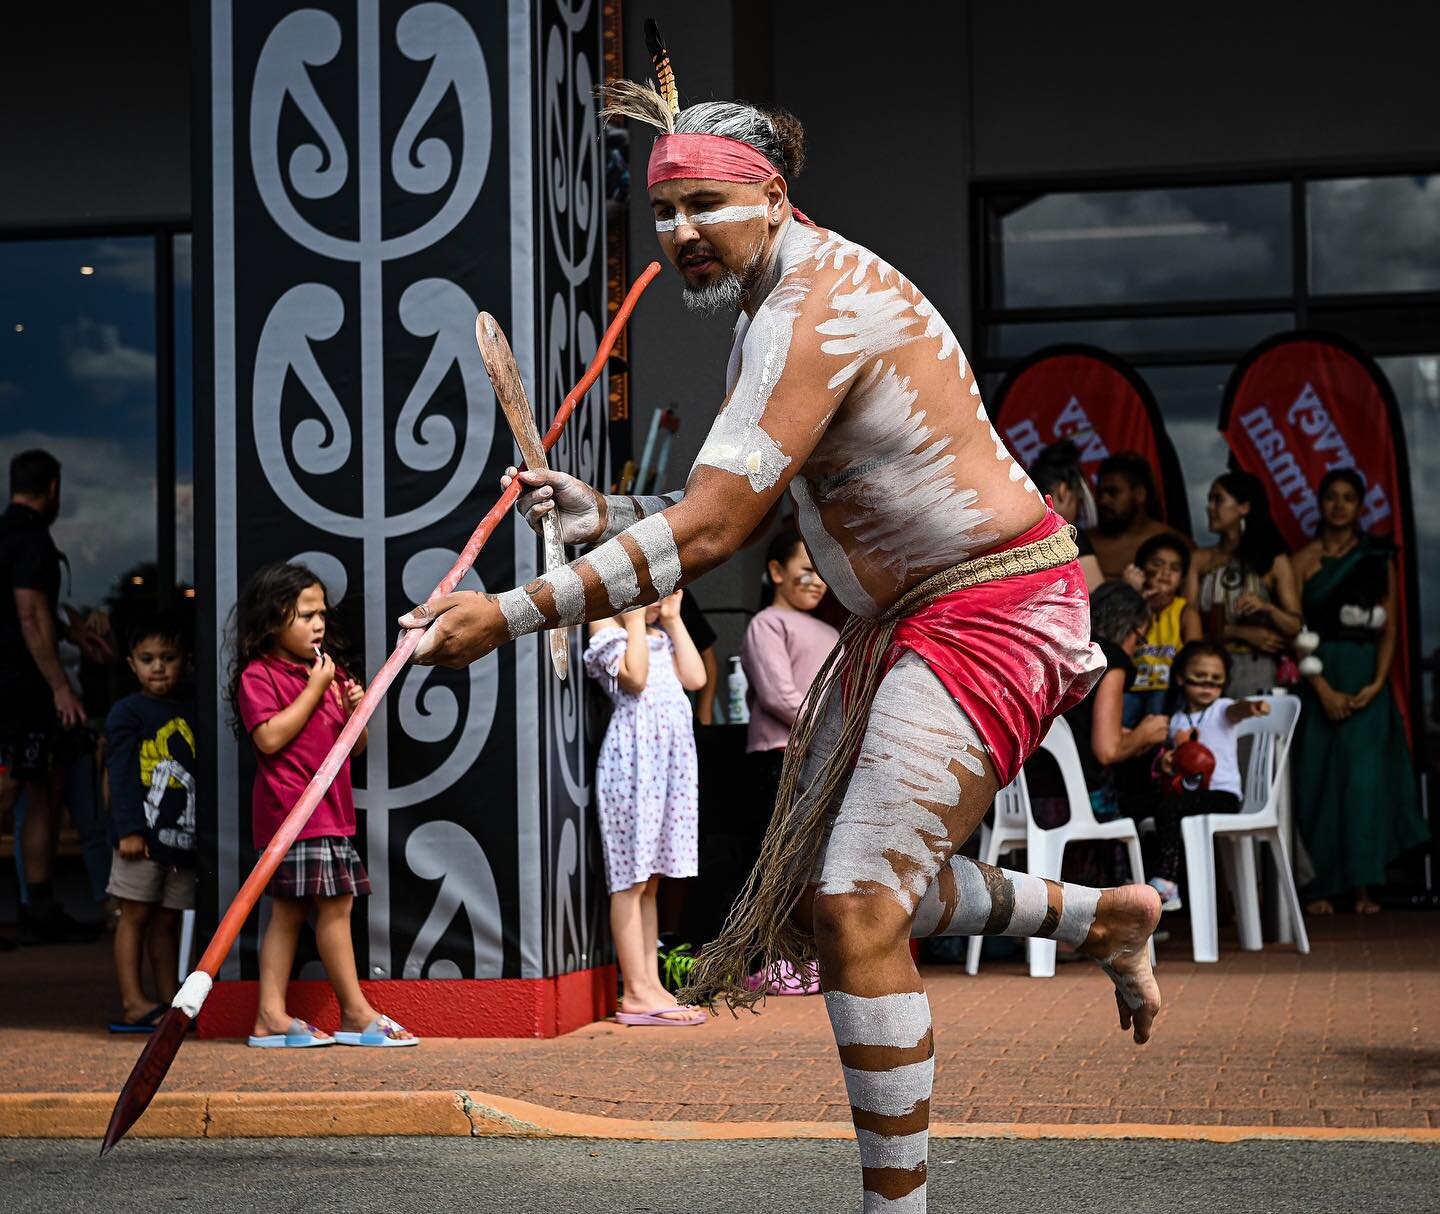 Few deadly snaps from the Harvey Norman fan day in Rotorua. Special moment having a stomp and representing our people over in Aotearoa 💯🖤

Bring on game night 👣🔥

#muggera #muggeradancers #sydney #dance #ceremony #culture #koori #australia #murri